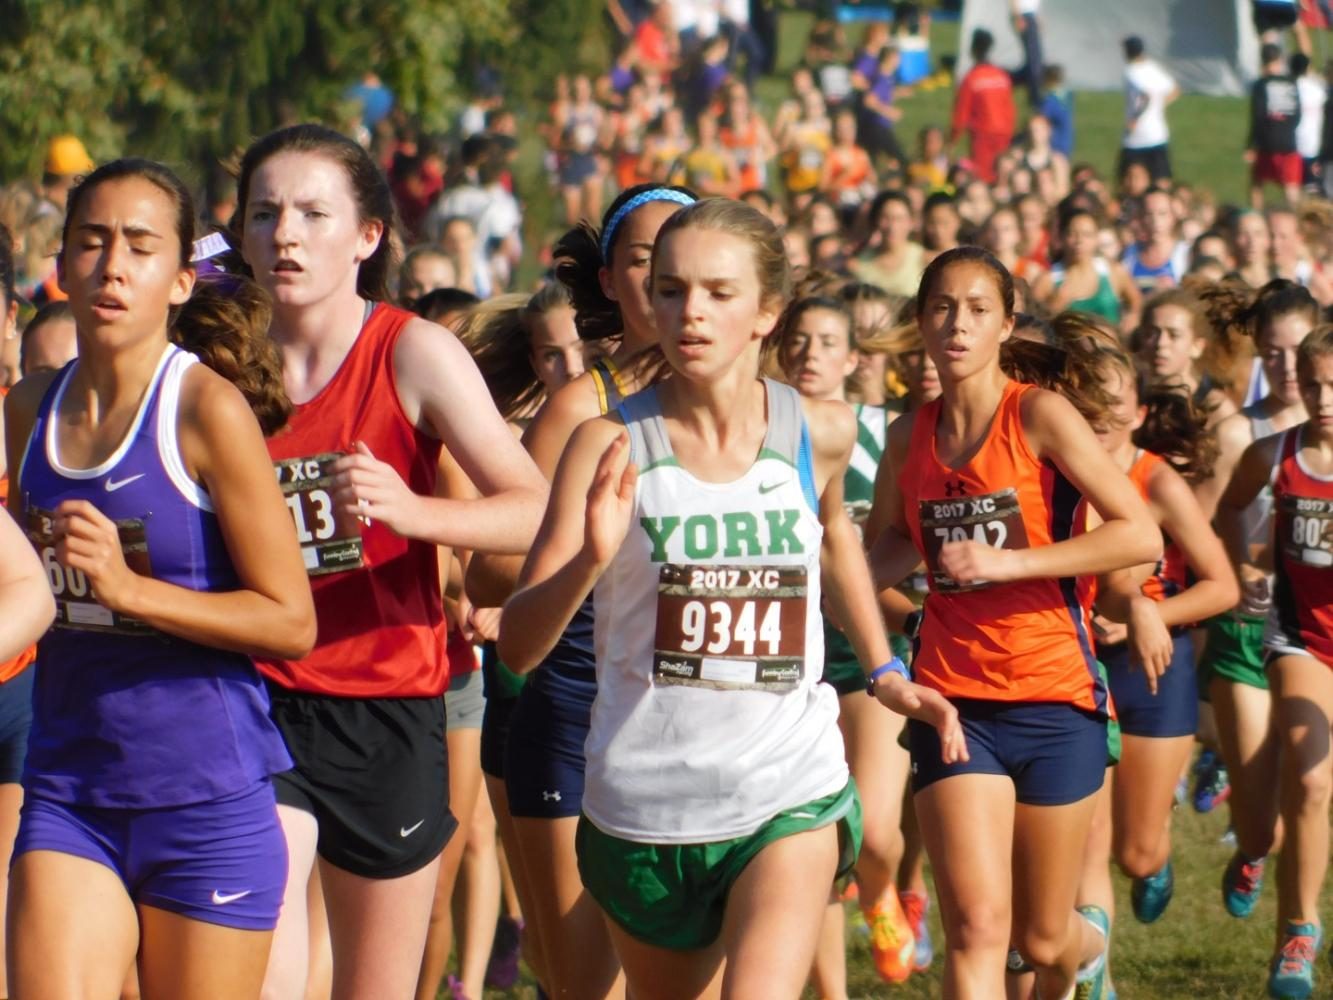 Gia Stephan, freshman, strides to the front of the pack at the second mile during the Frosh/Soph race